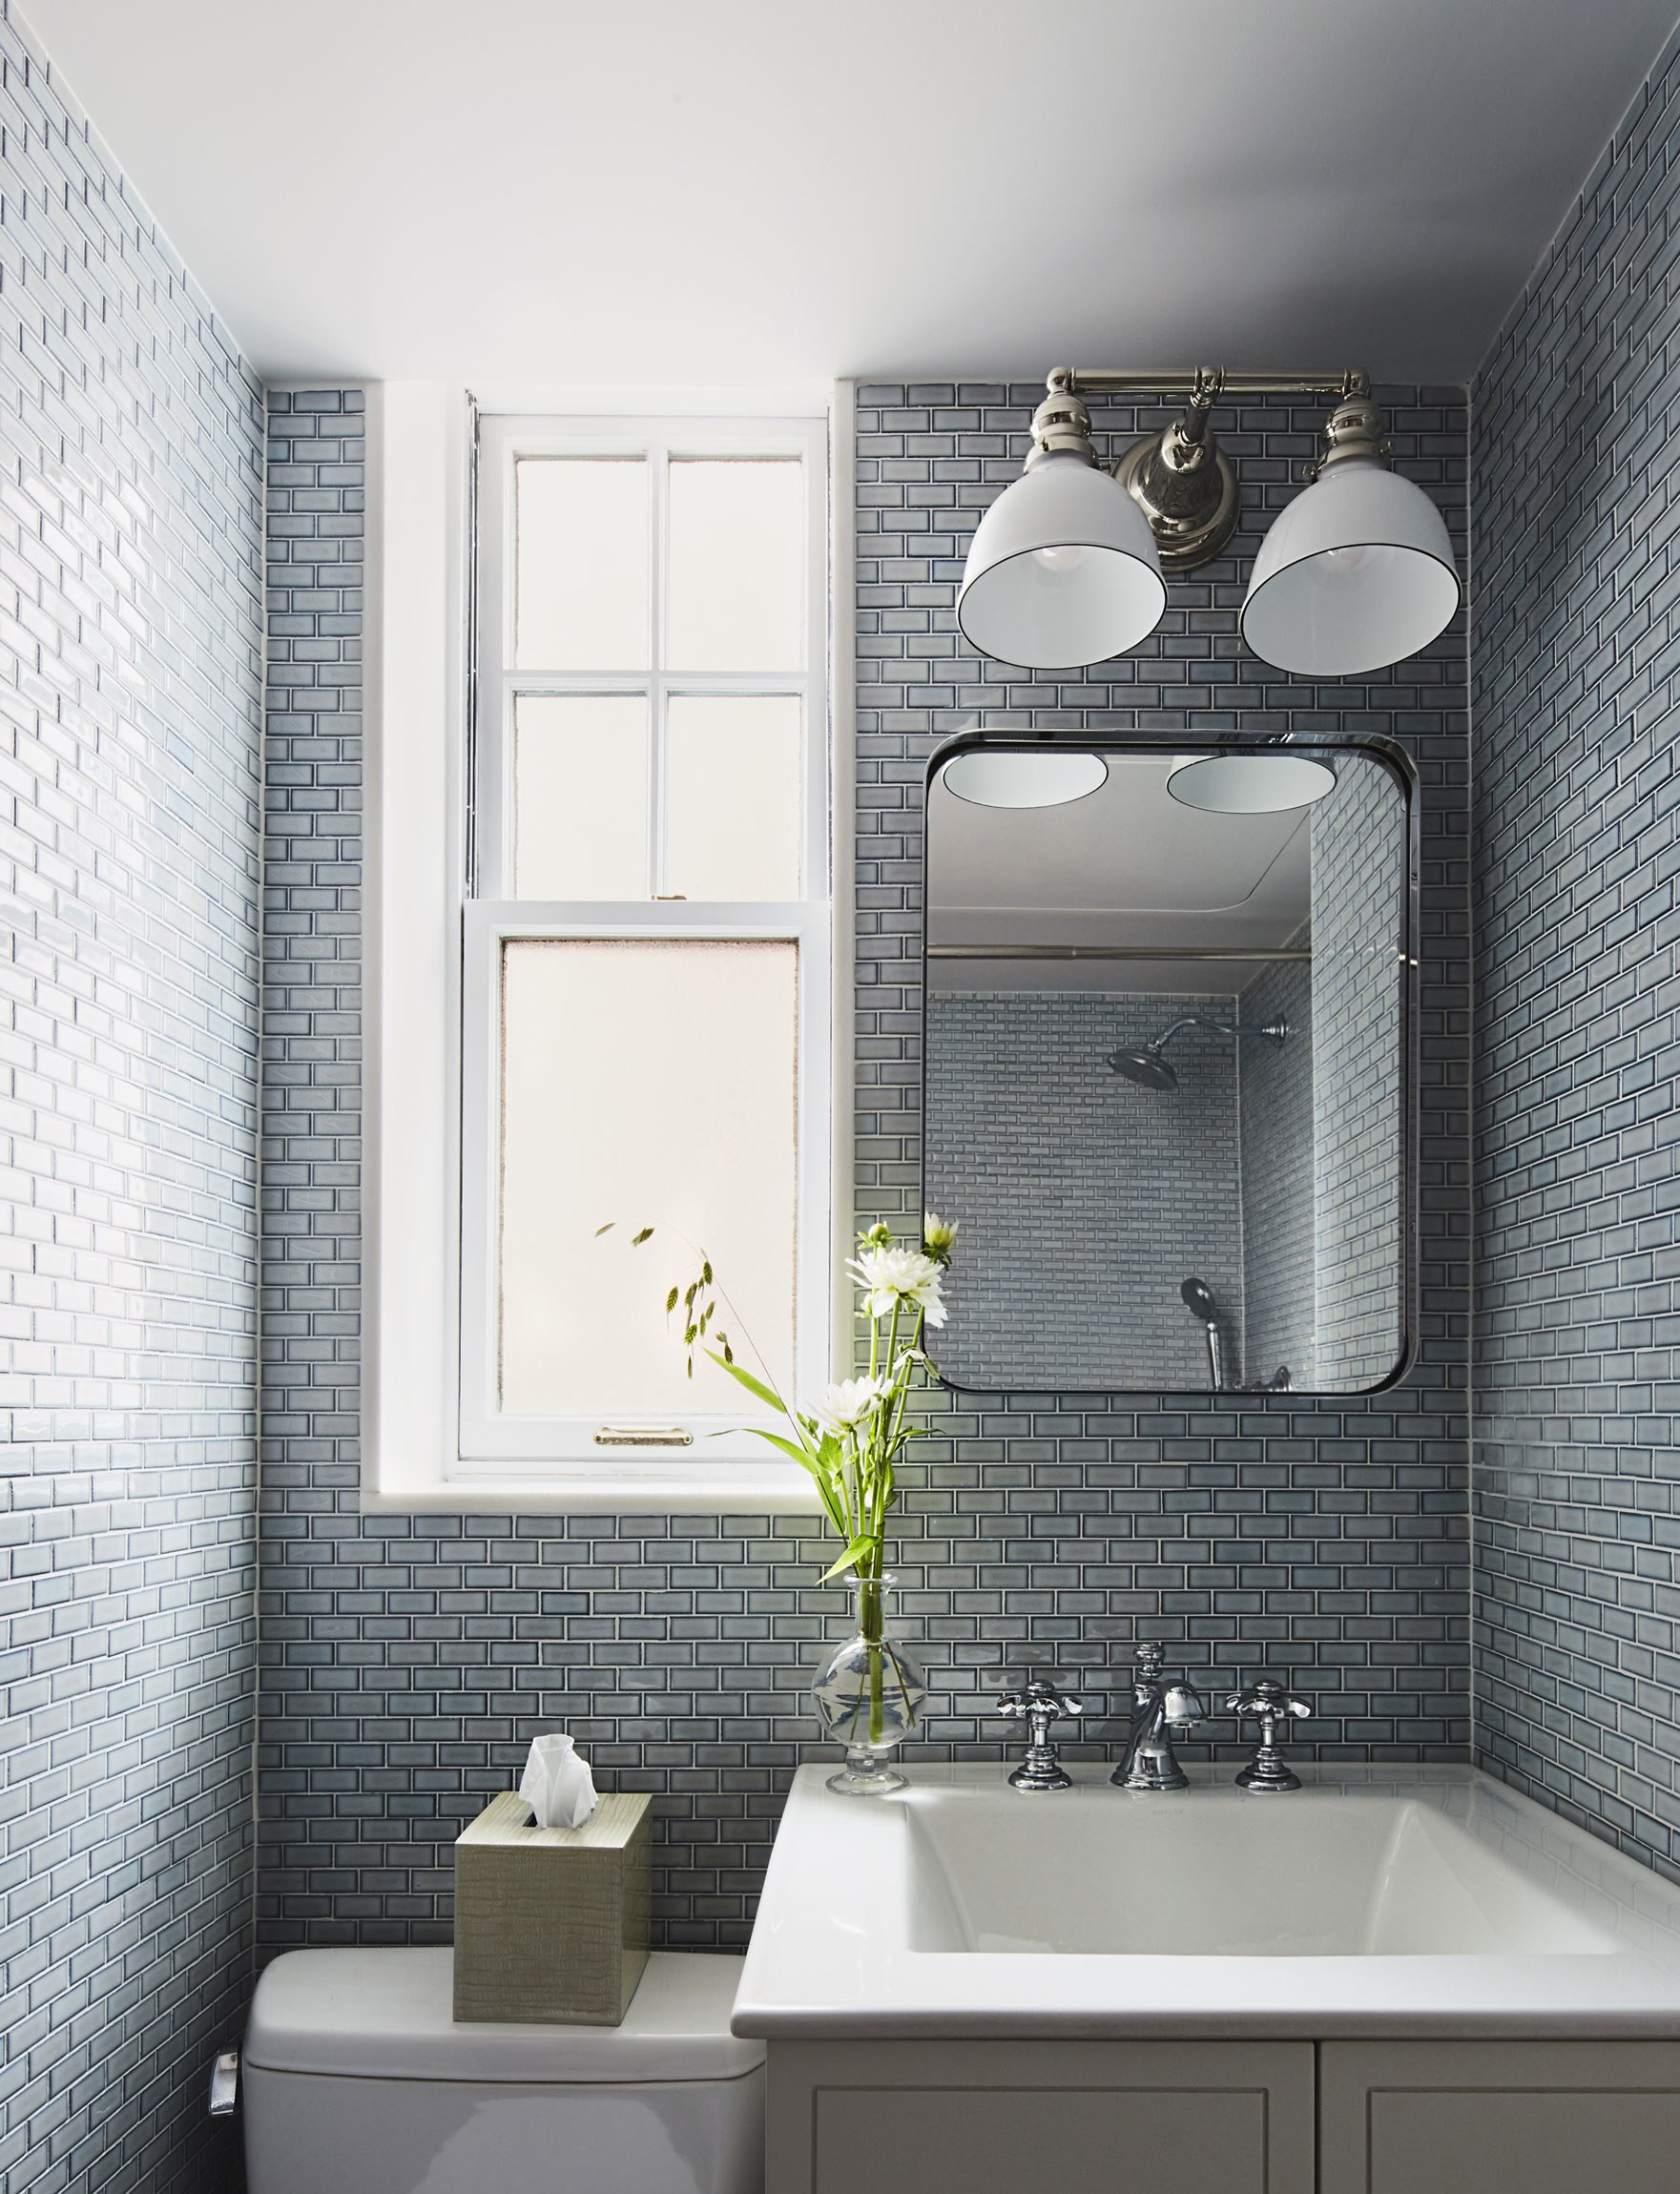 Small Tiled Bathroom
 This Bathroom Tile Design Idea Changes Everything